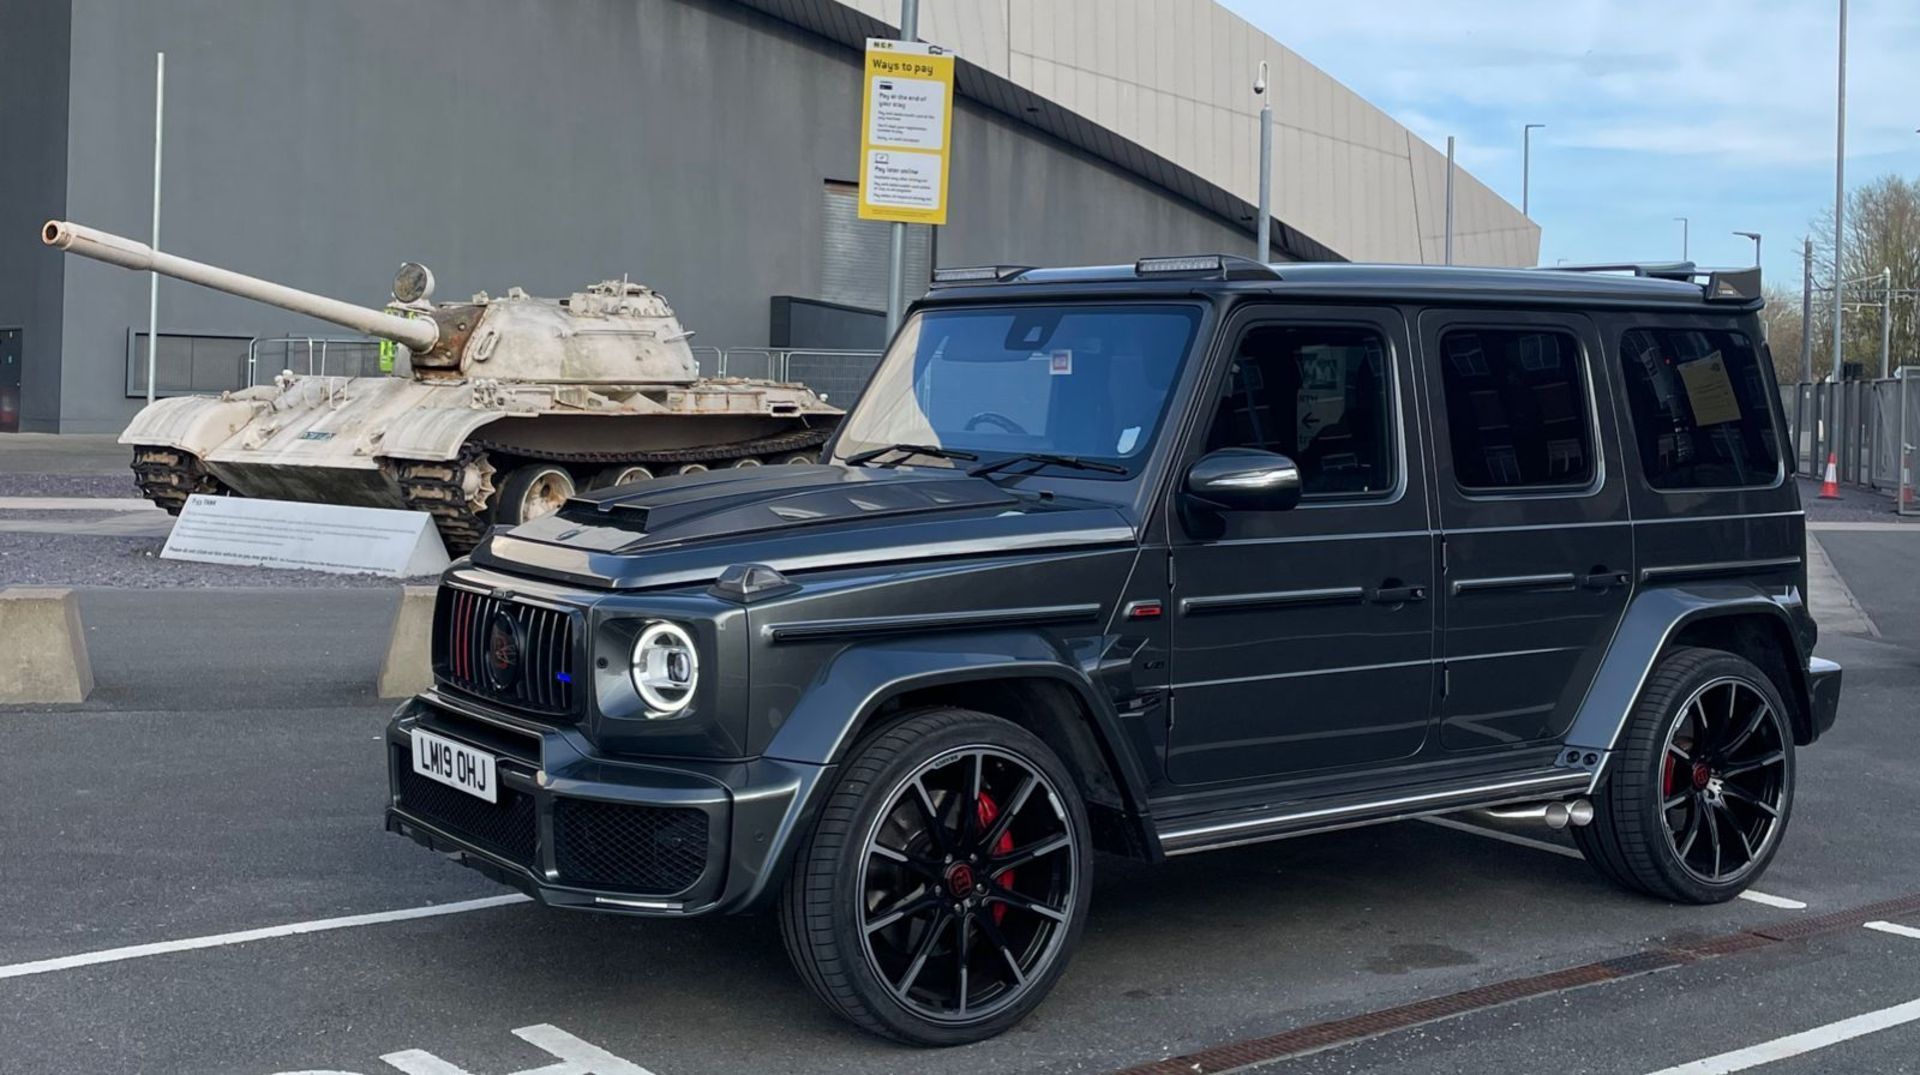 MERCEDES G63 BRABUS WIDE-STAR 800 STYLING GREY WITH BLACK LEATHER INTERIOR - Image 14 of 27